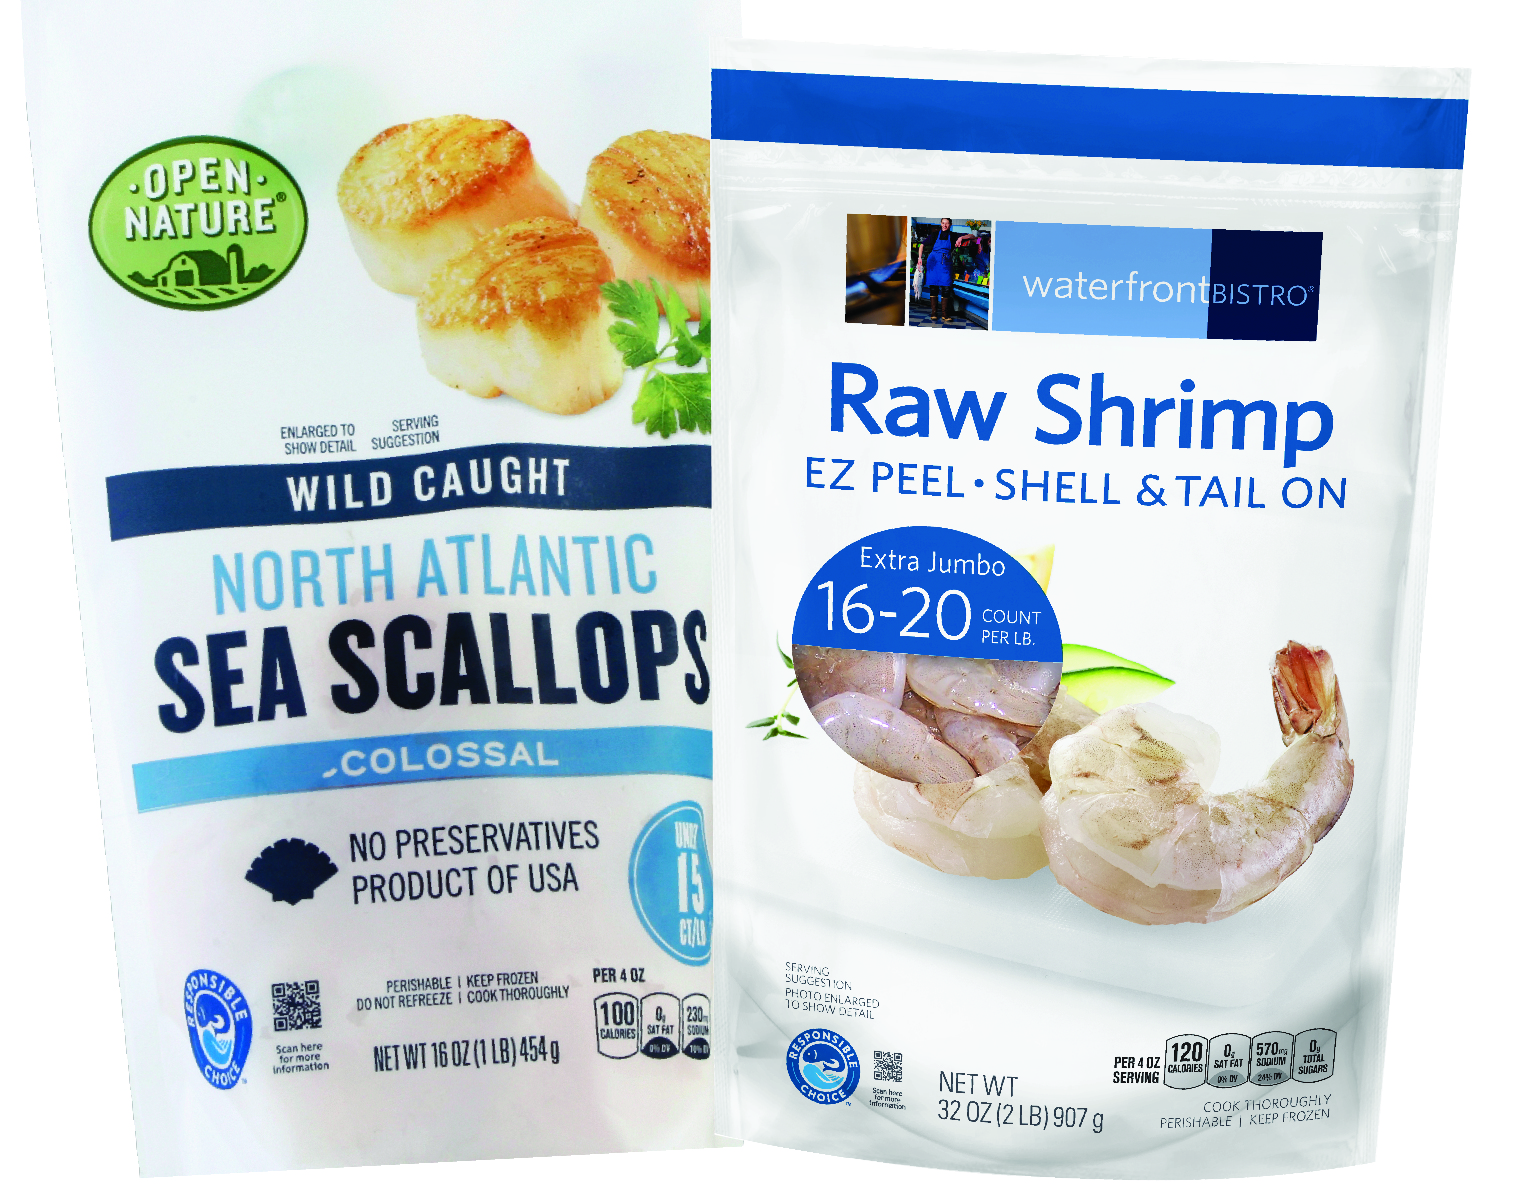 Albertsons Companies announced that 100 percent of the seafood in its celebrated waterfront BISTRO® and Open Nature® lines of Own Brands products will soon display the Responsible Choice™ logo for sustainable sourcing. The logo, displayed on the bottom left of the front panel, signifies that the seafood is responsibly caught or farmed.